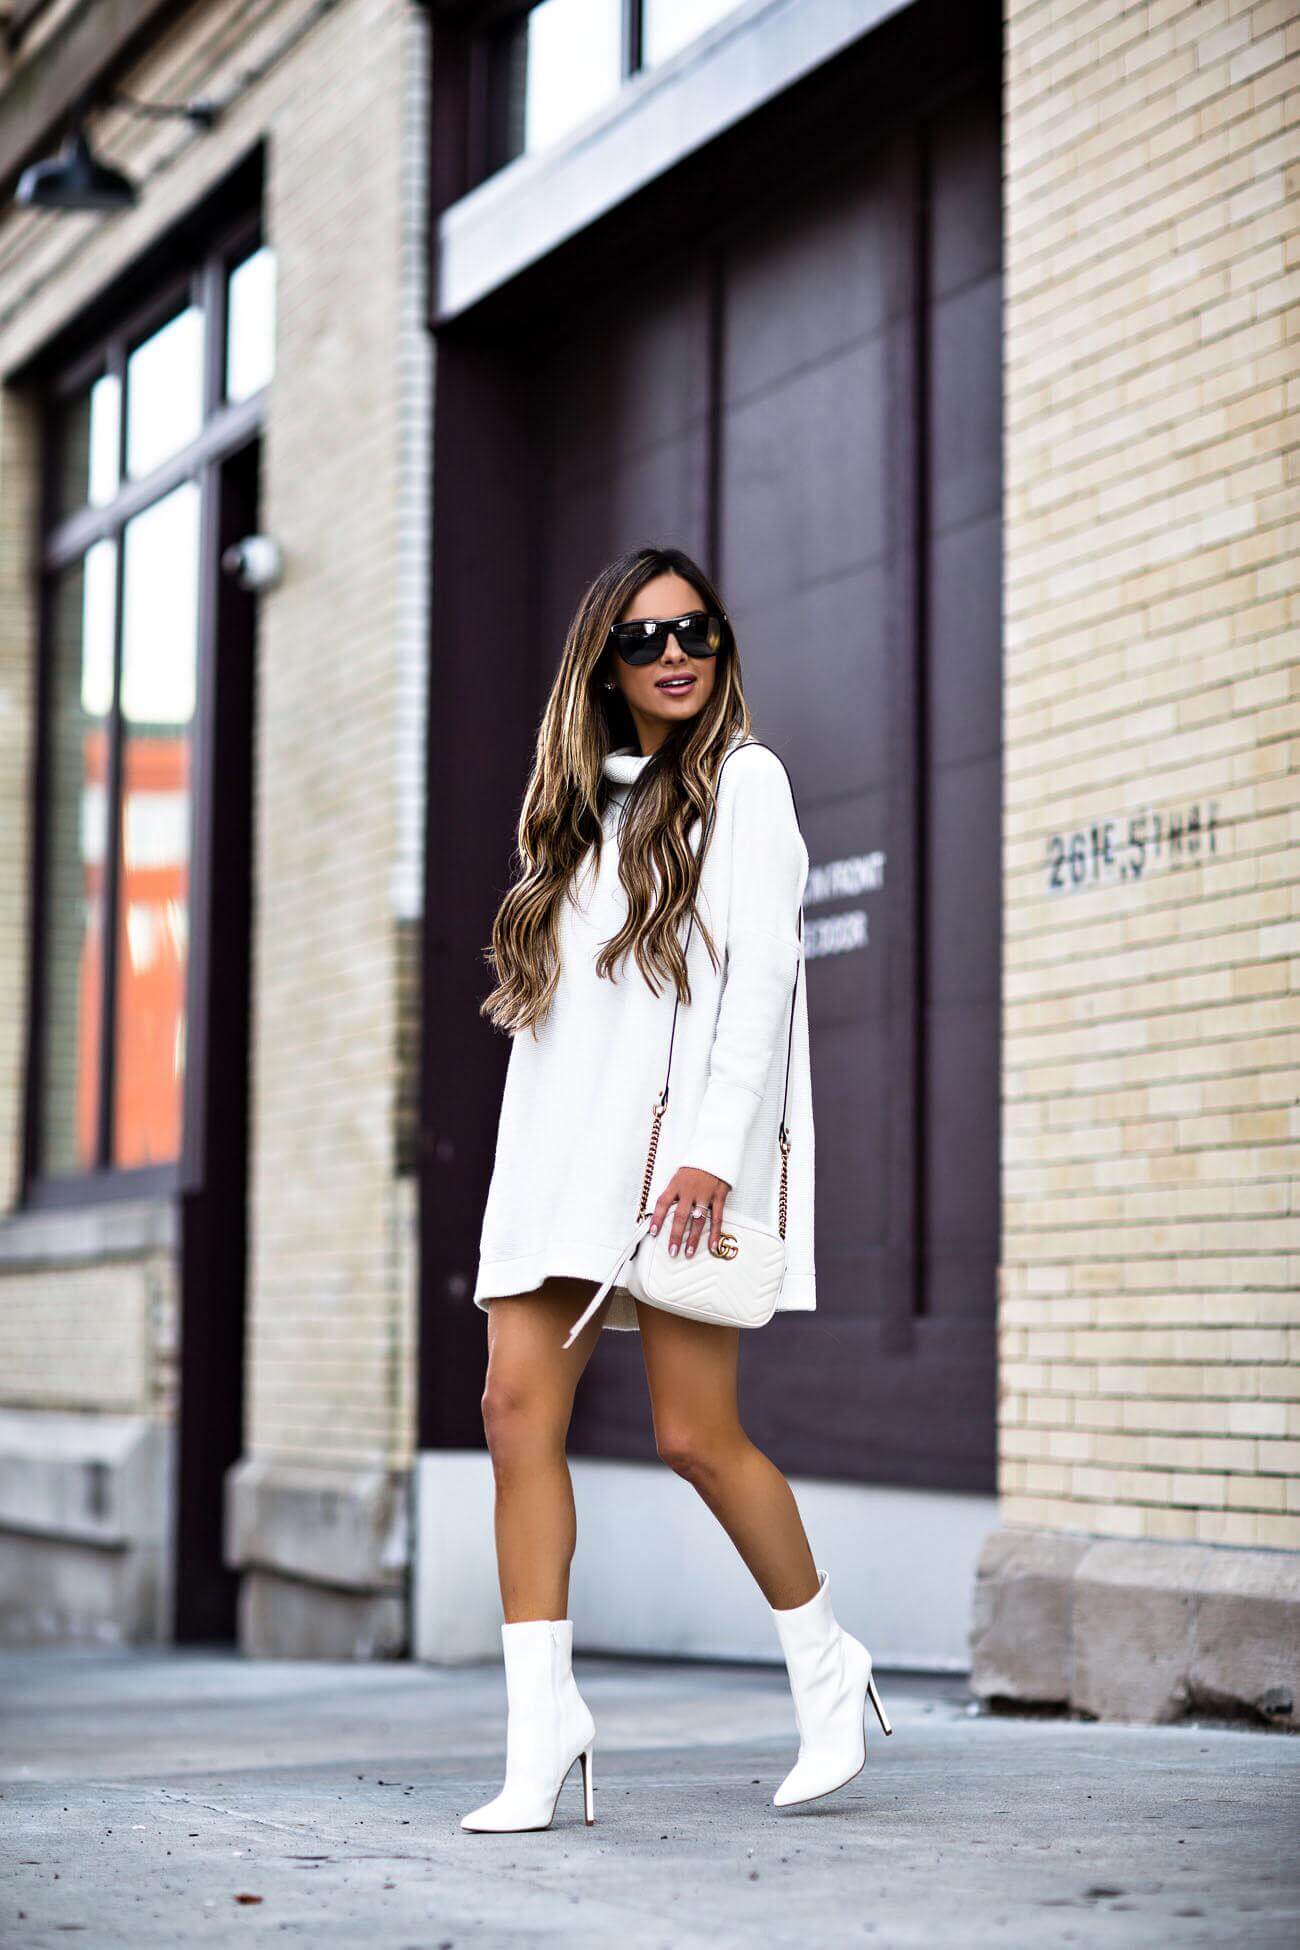 Winter White Fashion - How To Wear White In Winter